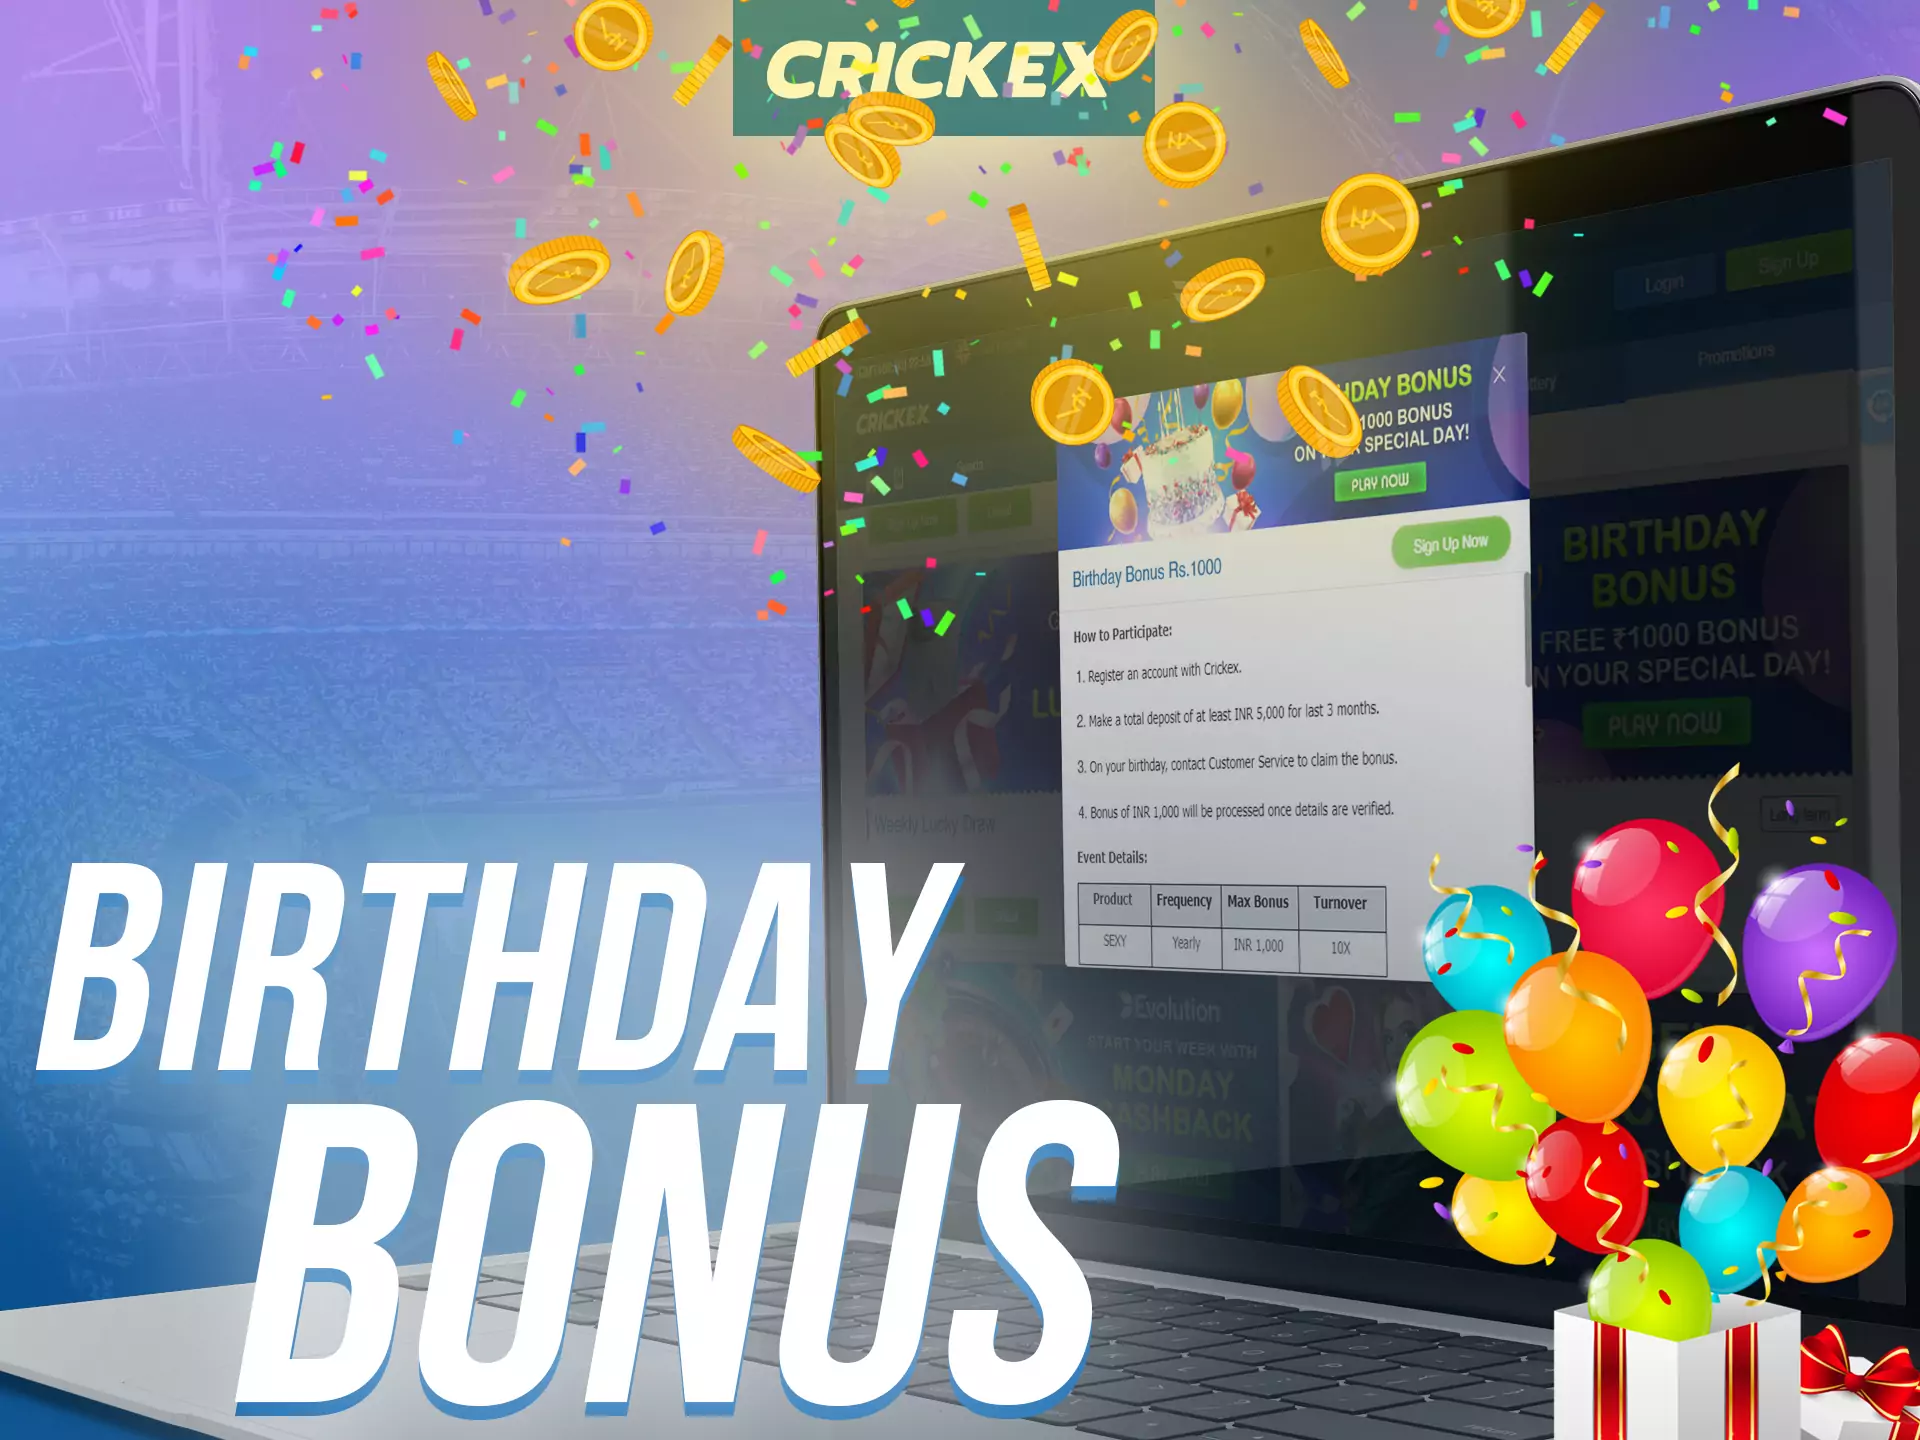 On Crickex, enter your birthday and get a special bonus.